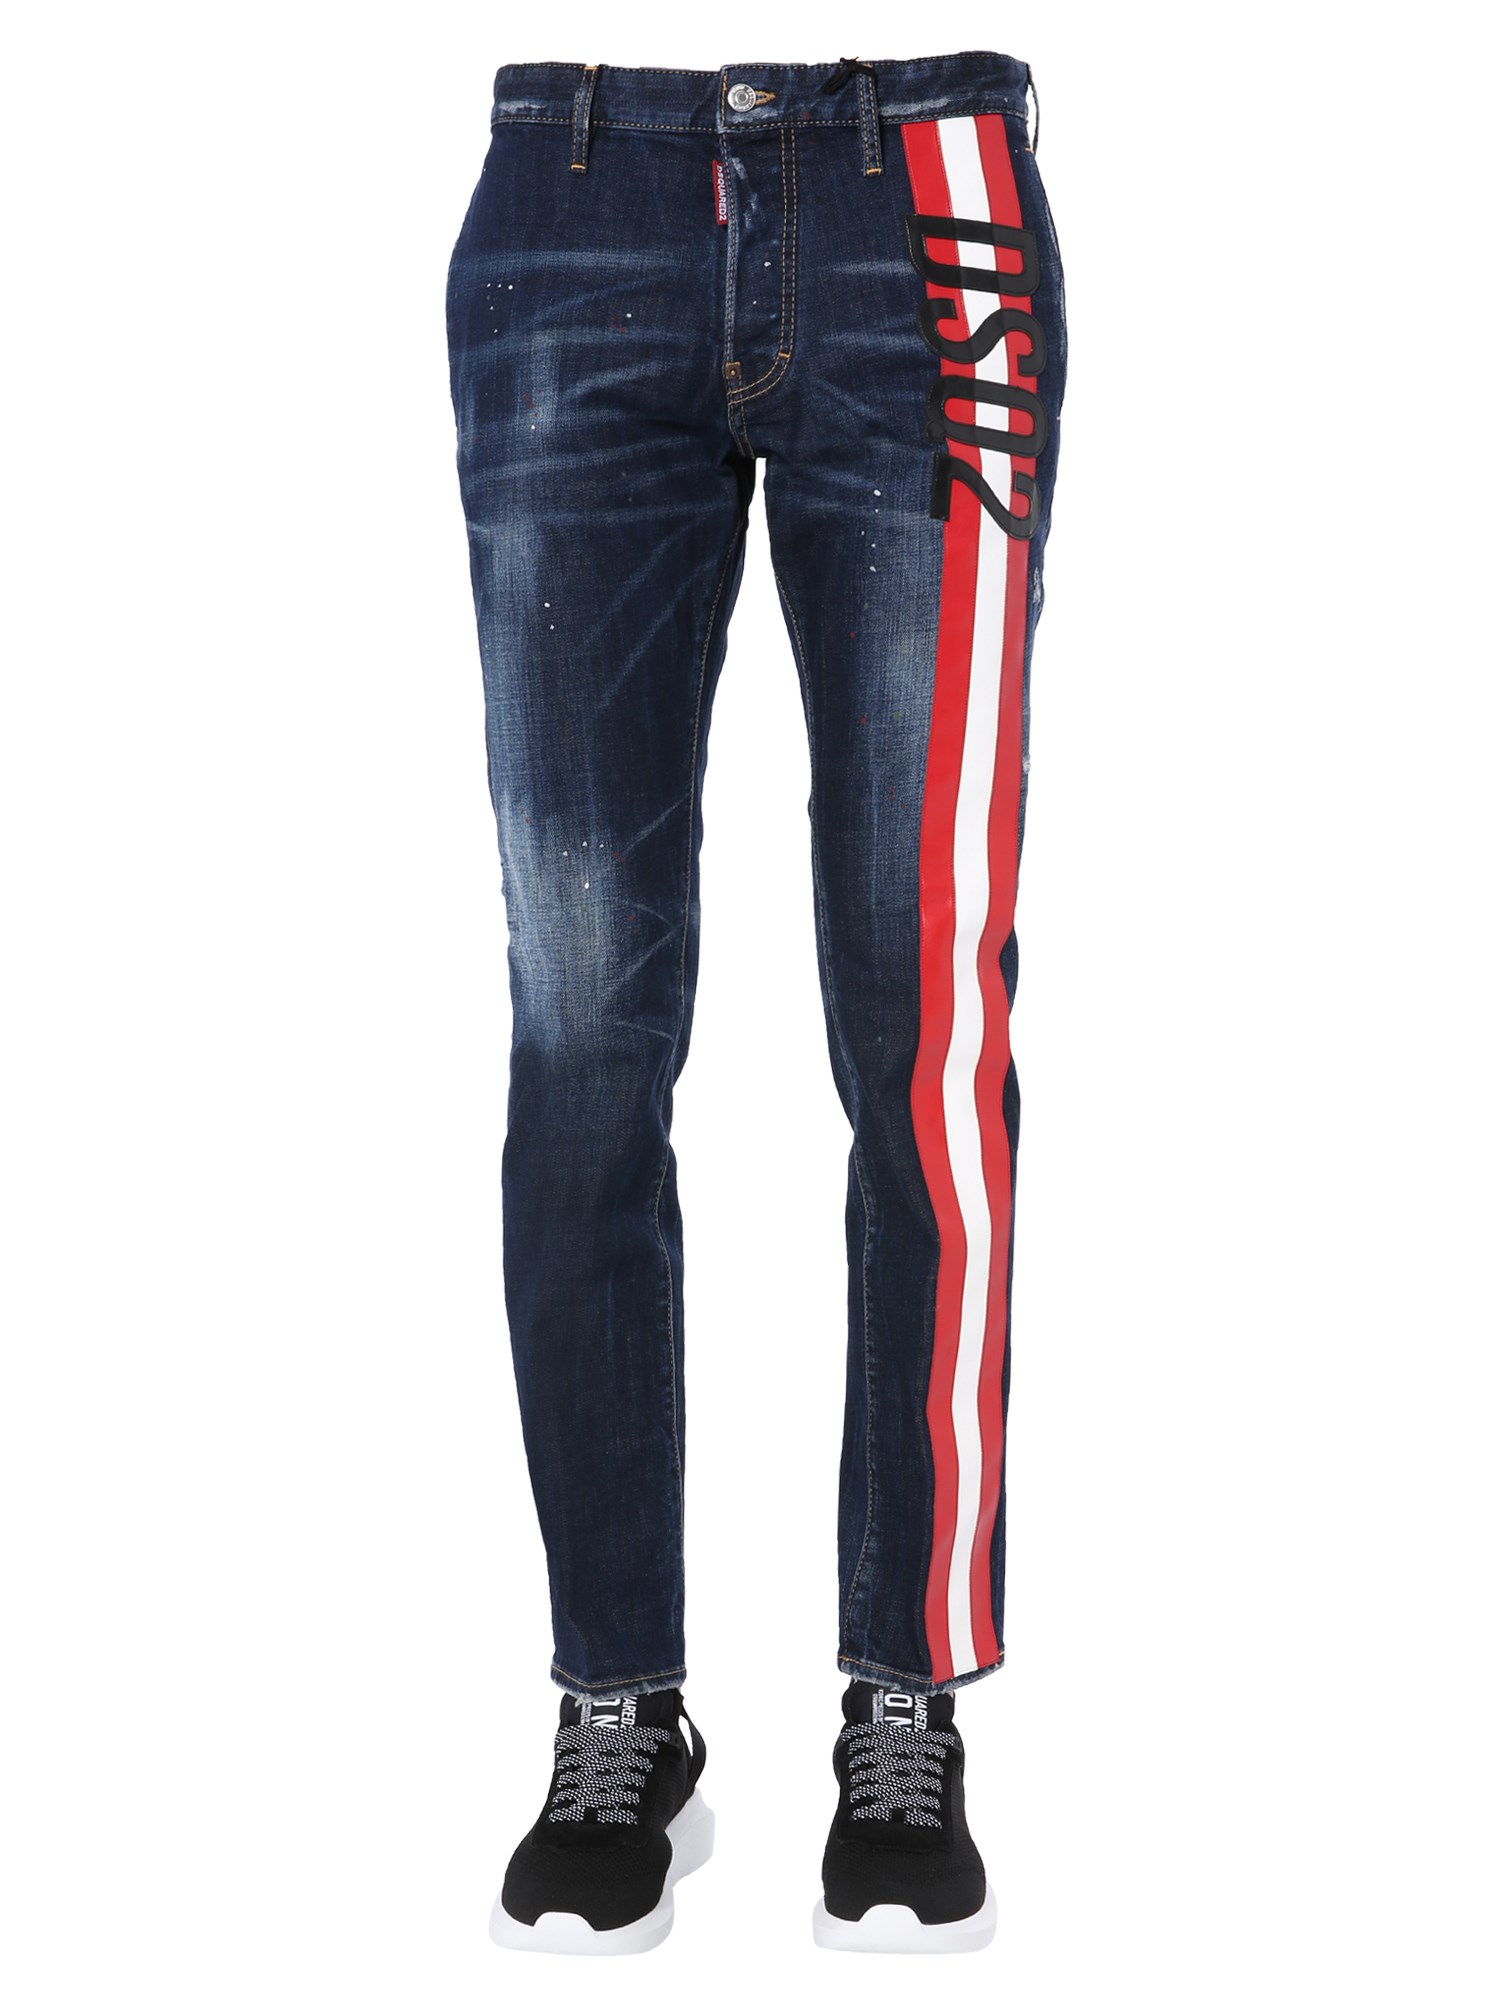 DSQUARED2 COOL GUY JEANS,173225